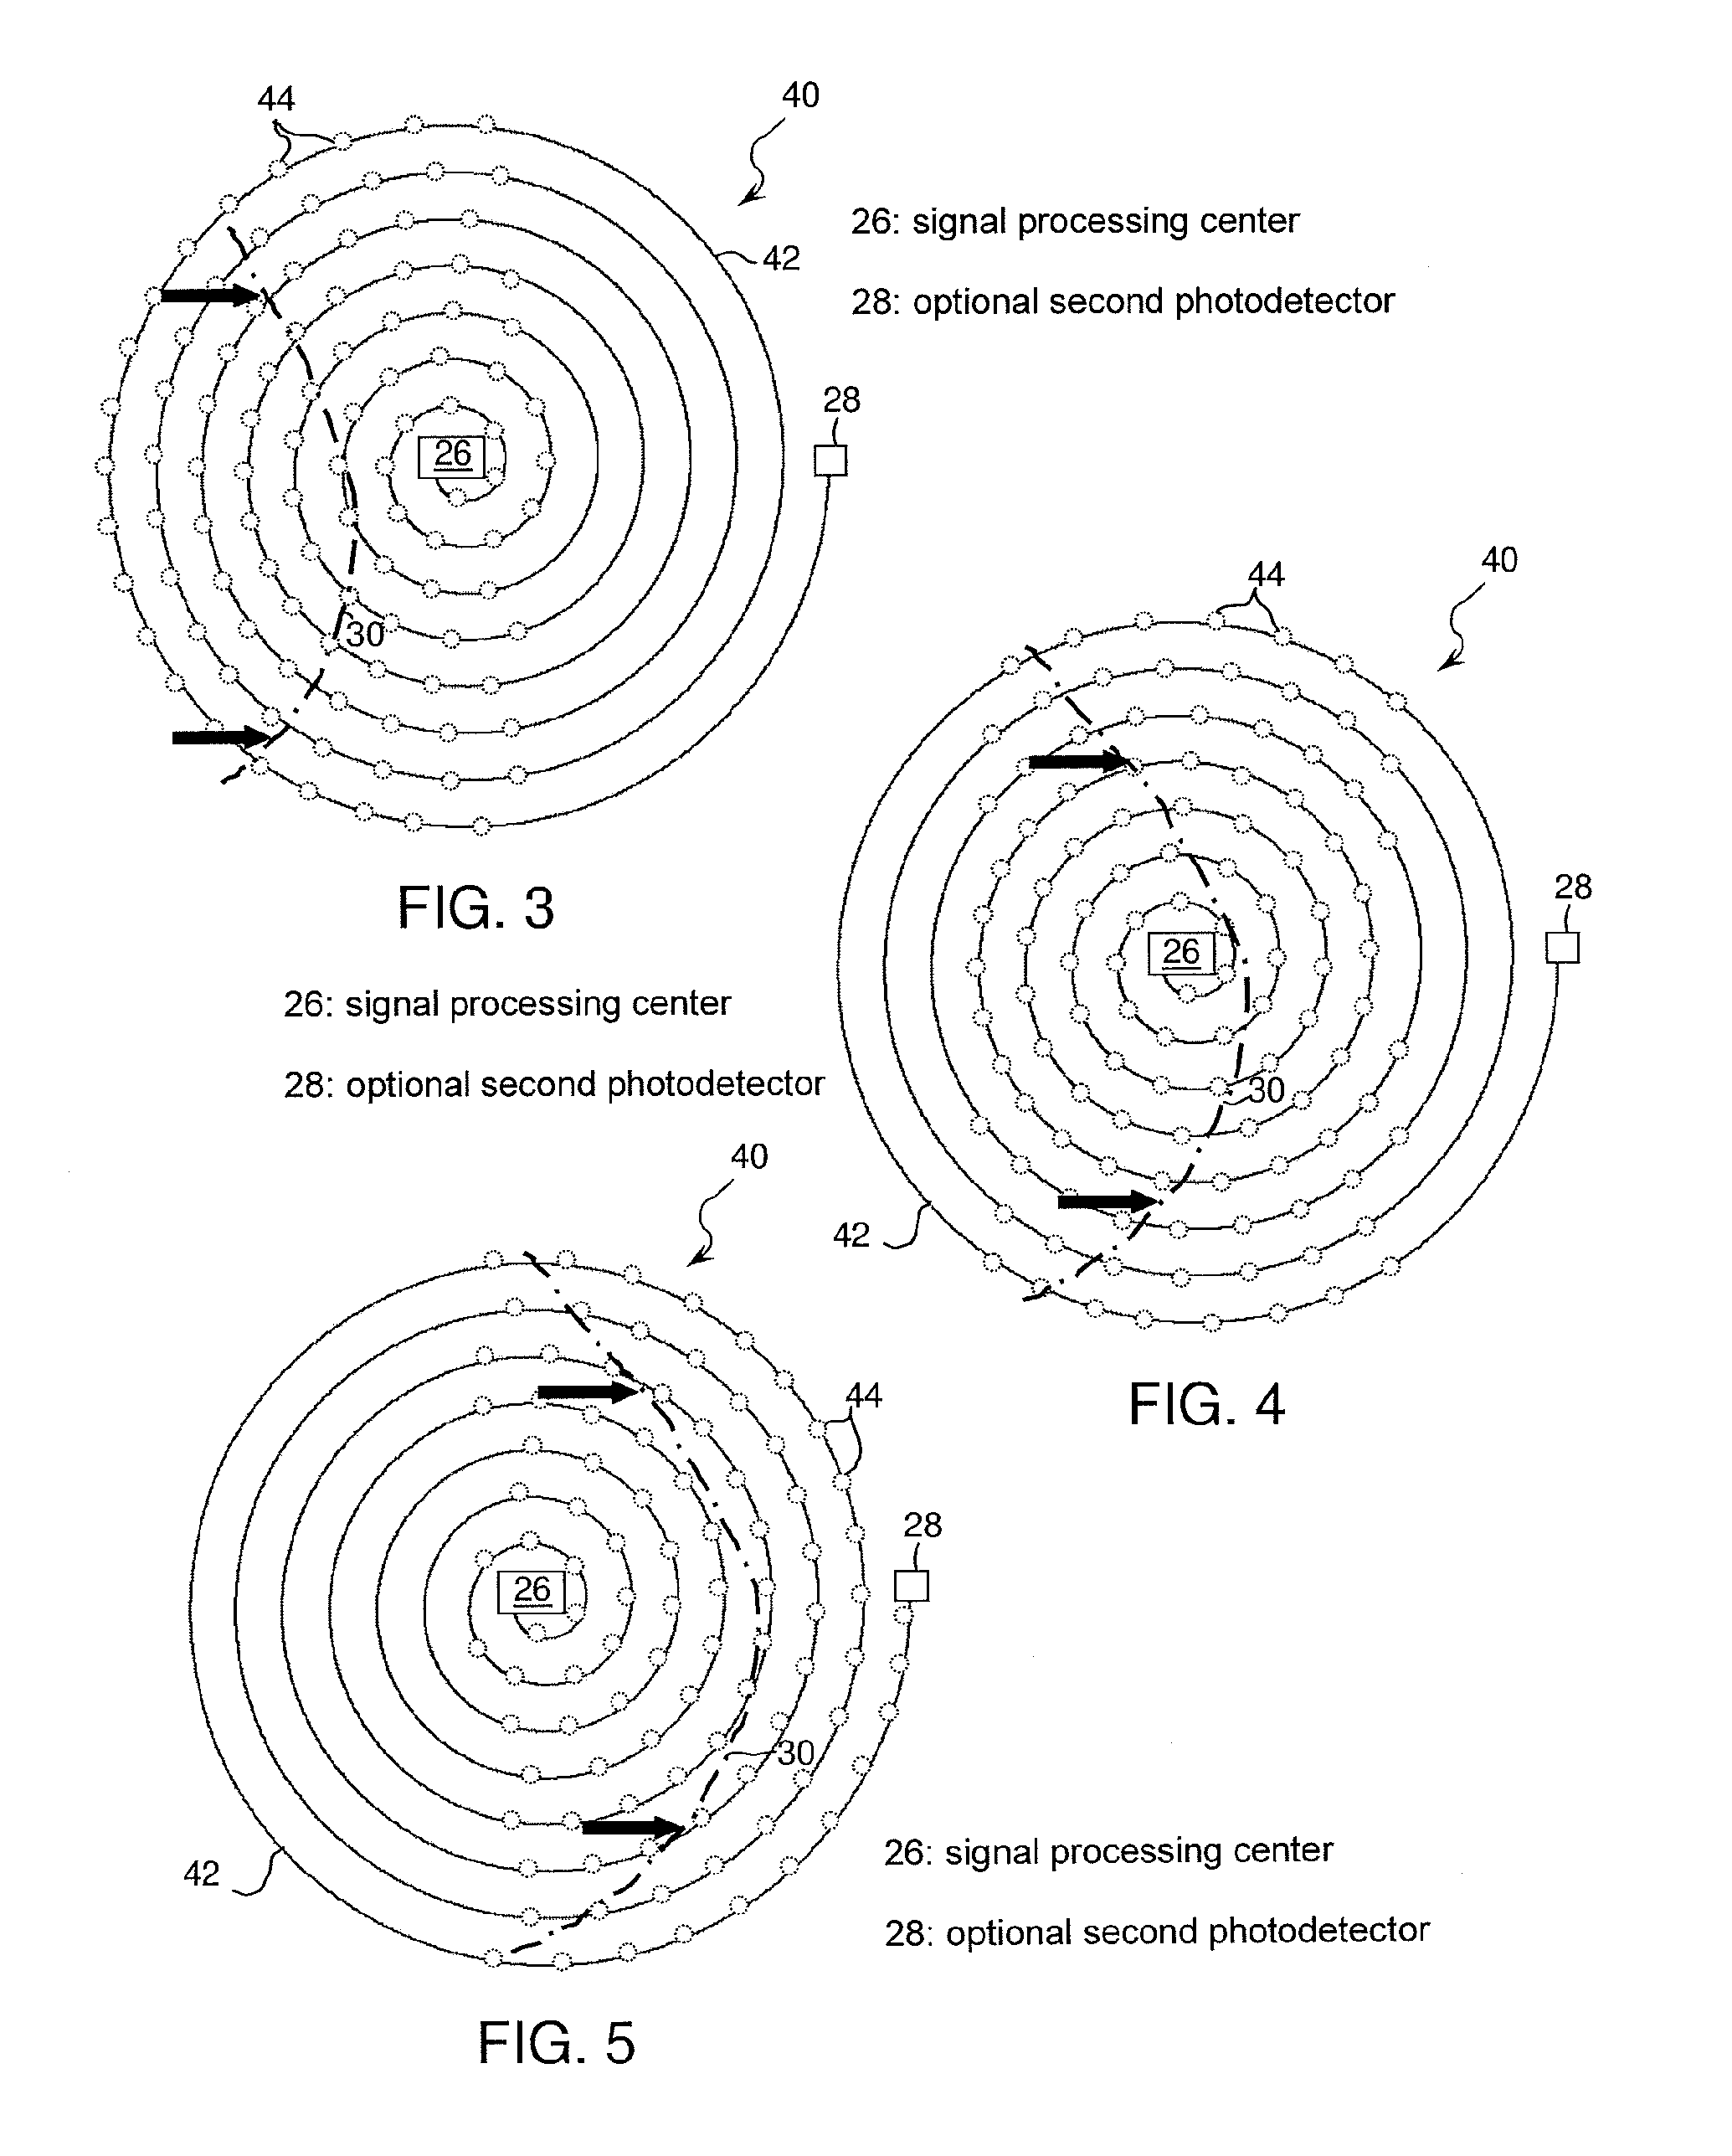 Areal monitoring using distributed acoustic sensing